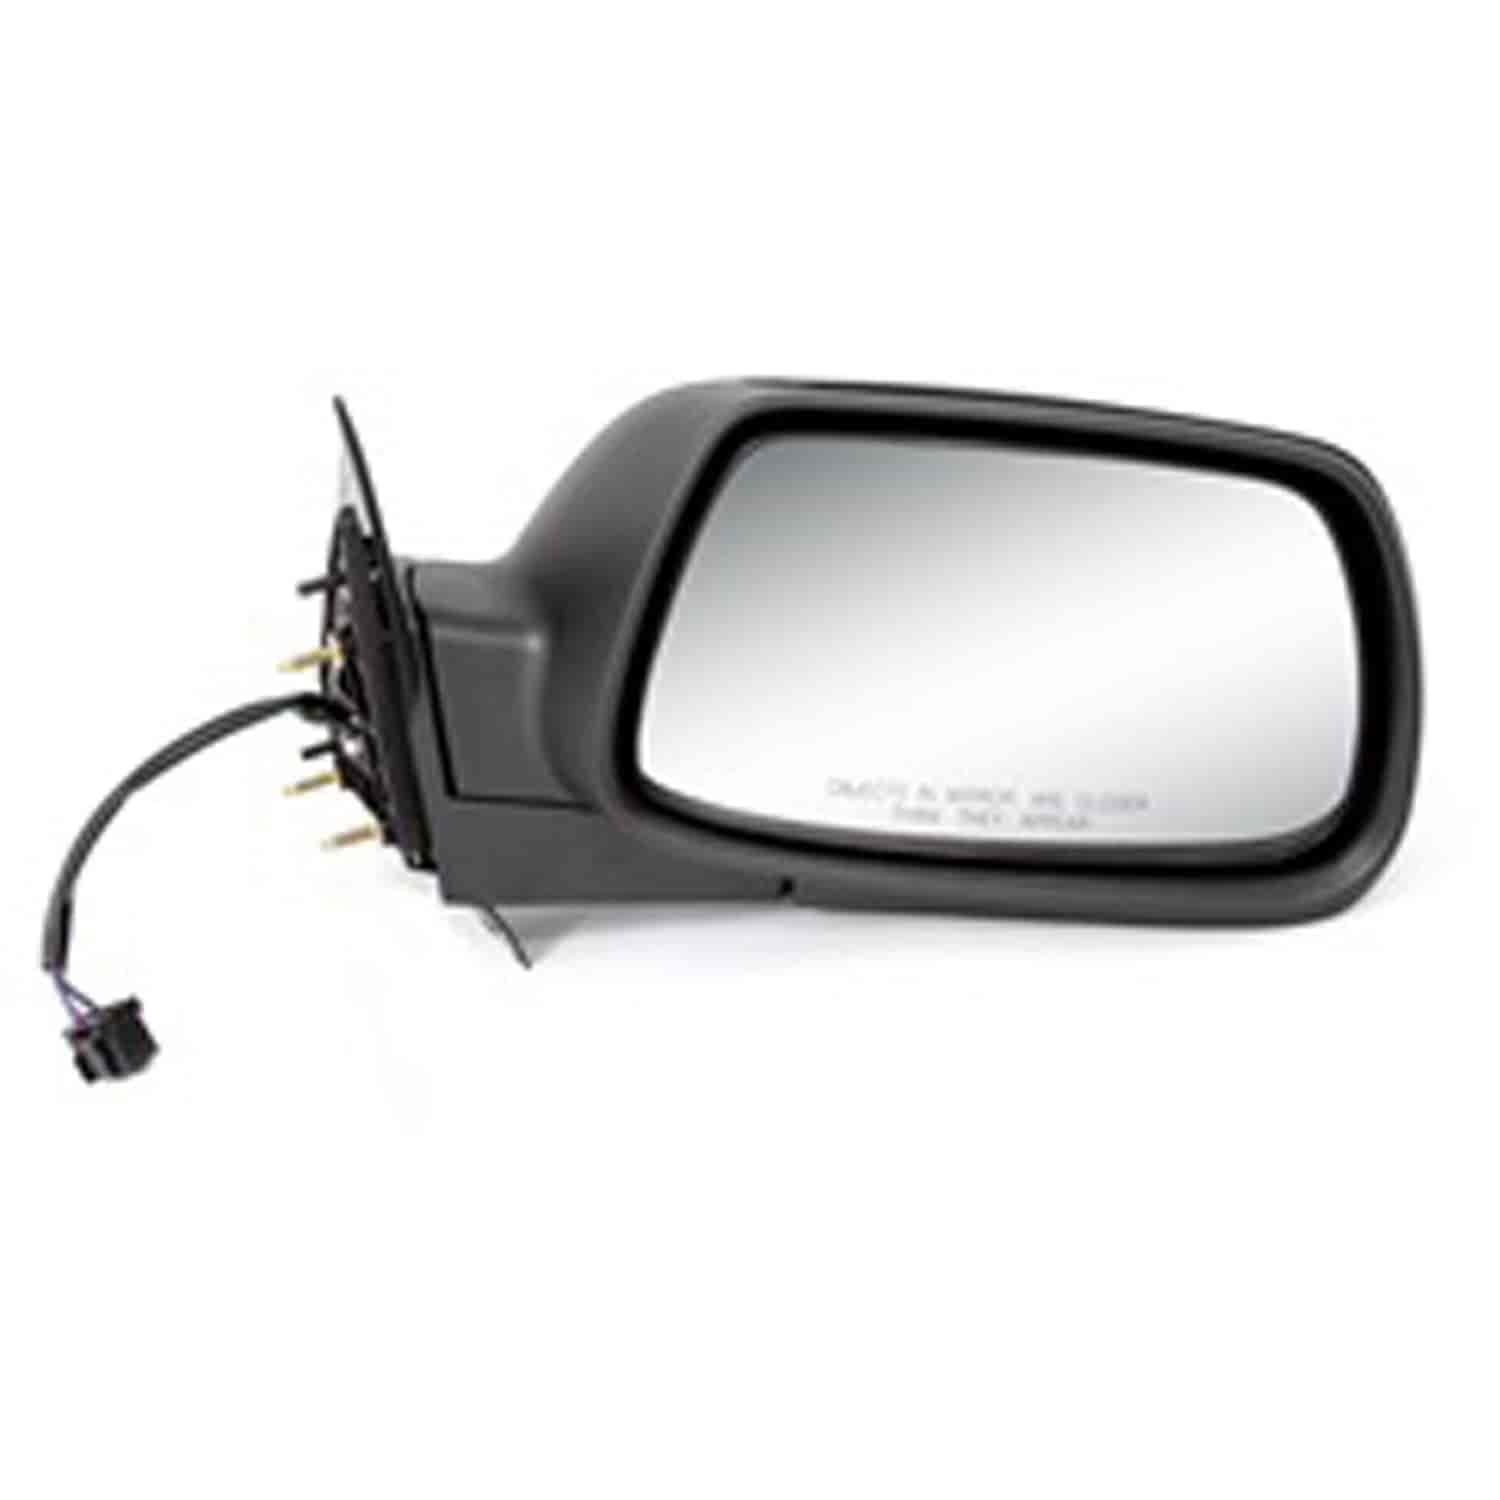 This black folding power door mirror from Omix-ADA fits the right door on 05-10 Jeep Grand Cherokee